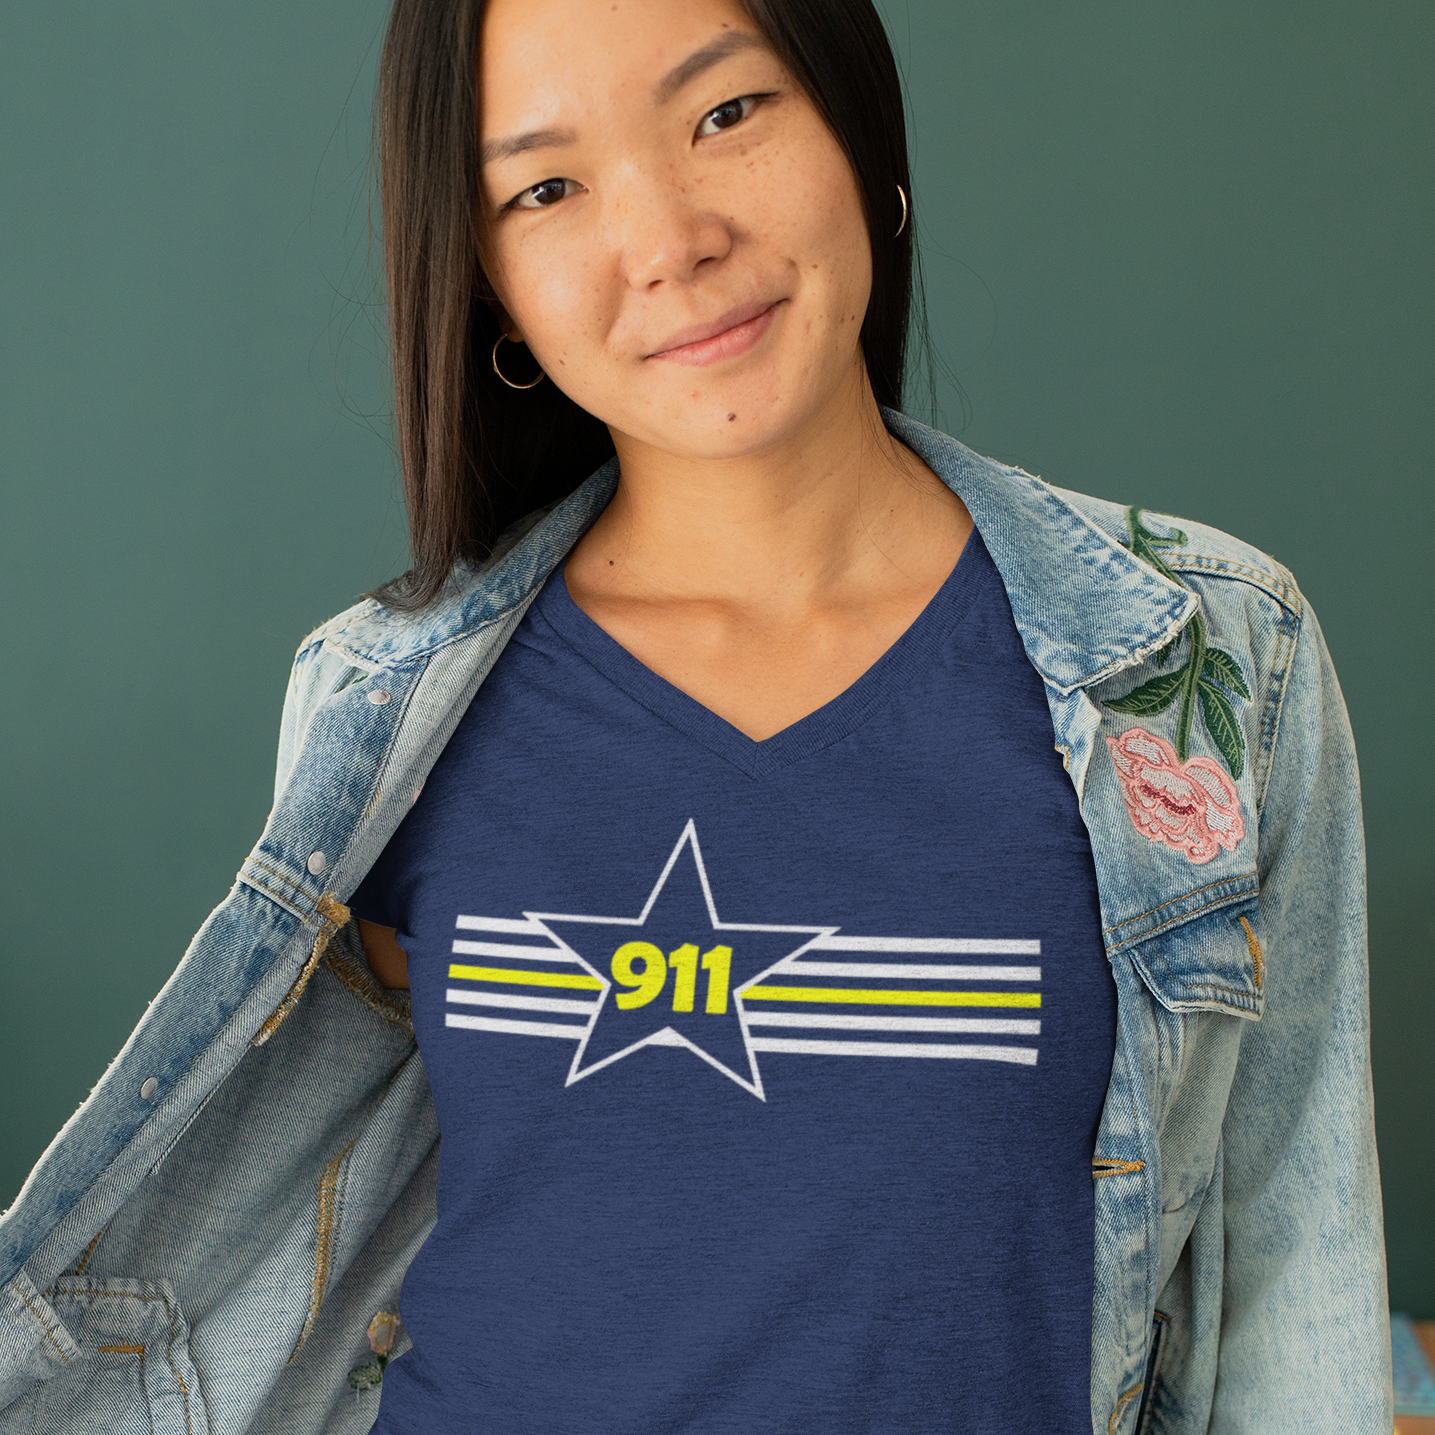 911 Thin Gold/Yellow Line Star and Stripes Ladies V Neck T Shirt - Cold Dinner Club